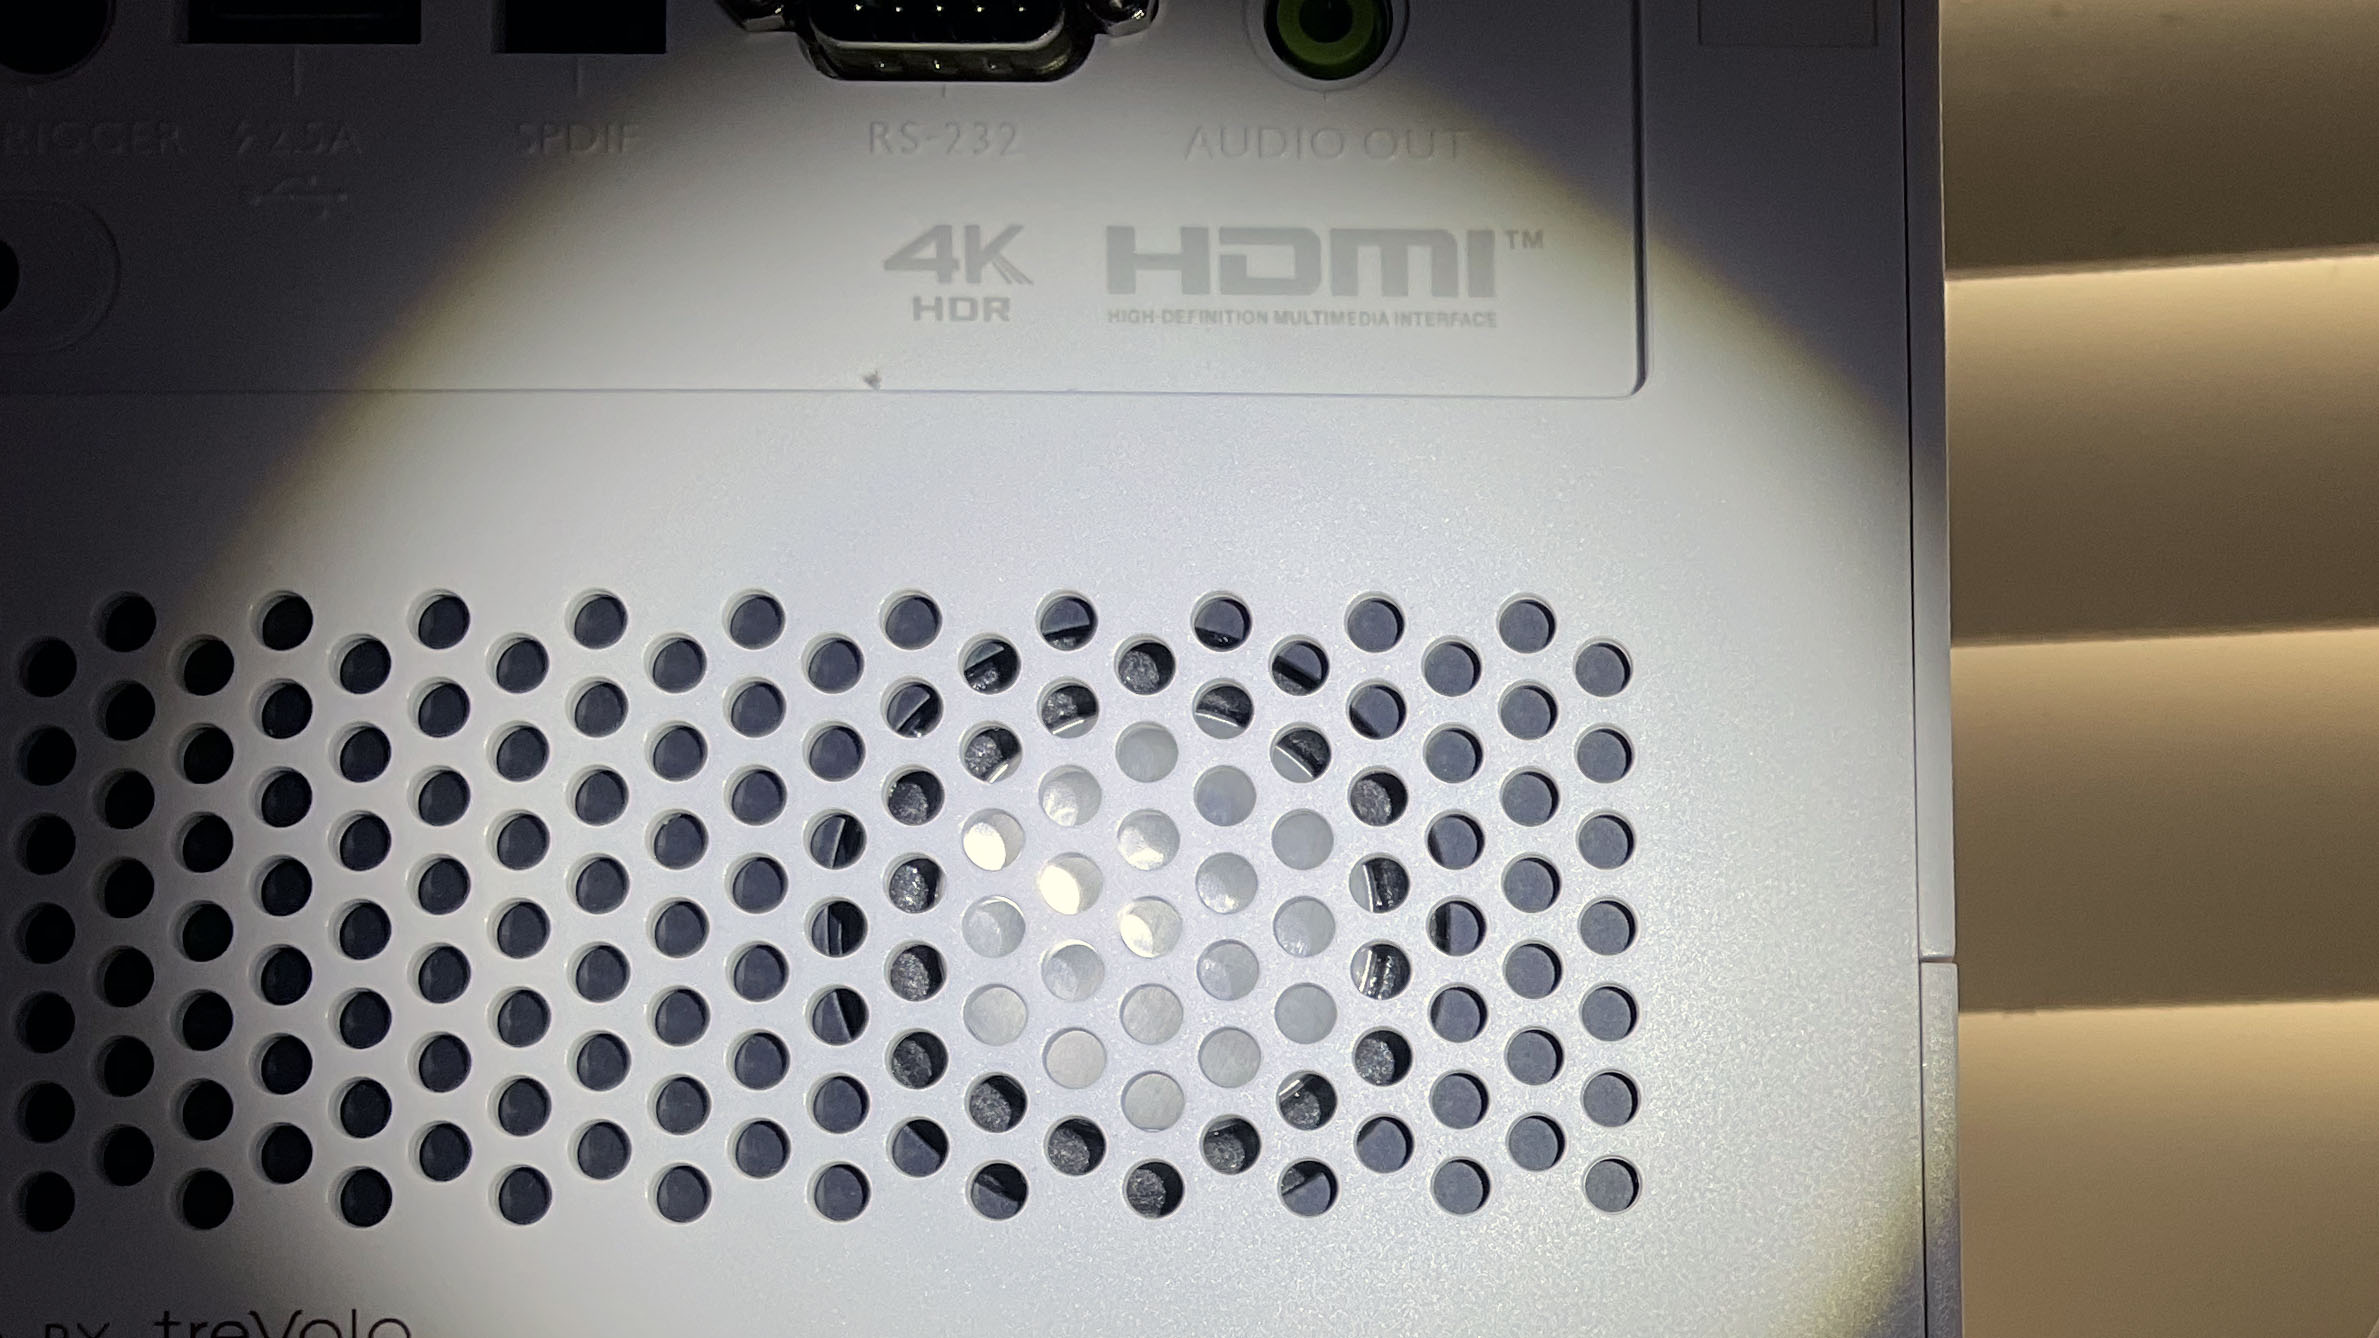 One of the rear-facing speakers in the BenQ X3000i gaming projector.